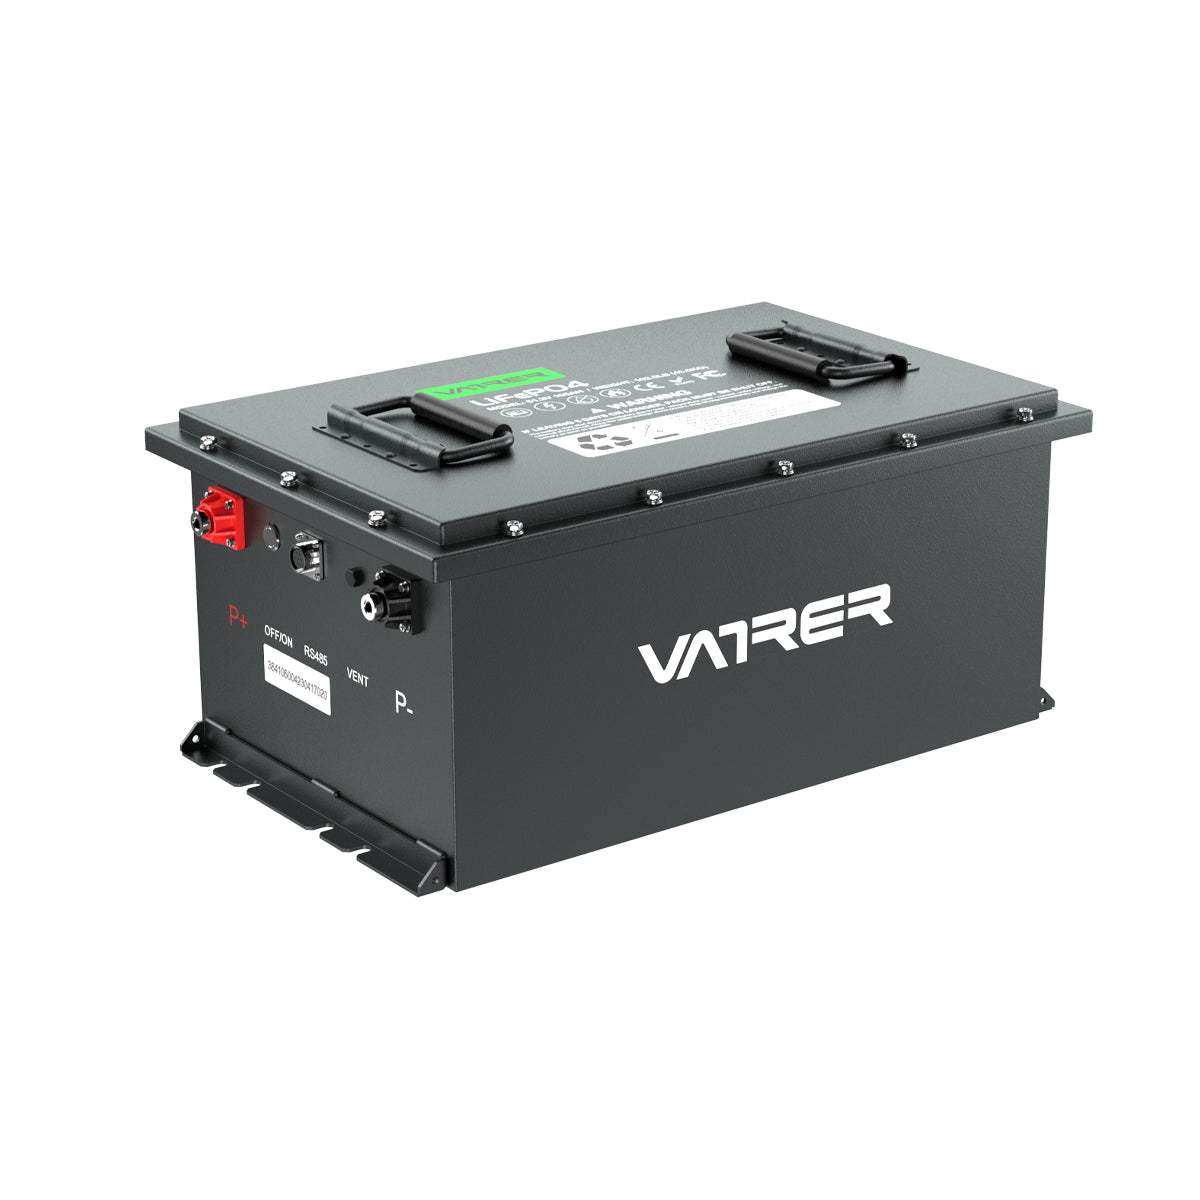 Vatrer 48V 105AH LiFePO4 Golf Cart Battery, Built-in 200A BMS, 4000+ Cycles  Rechargeable Lithium Battery, Max 10.24kW Power Output